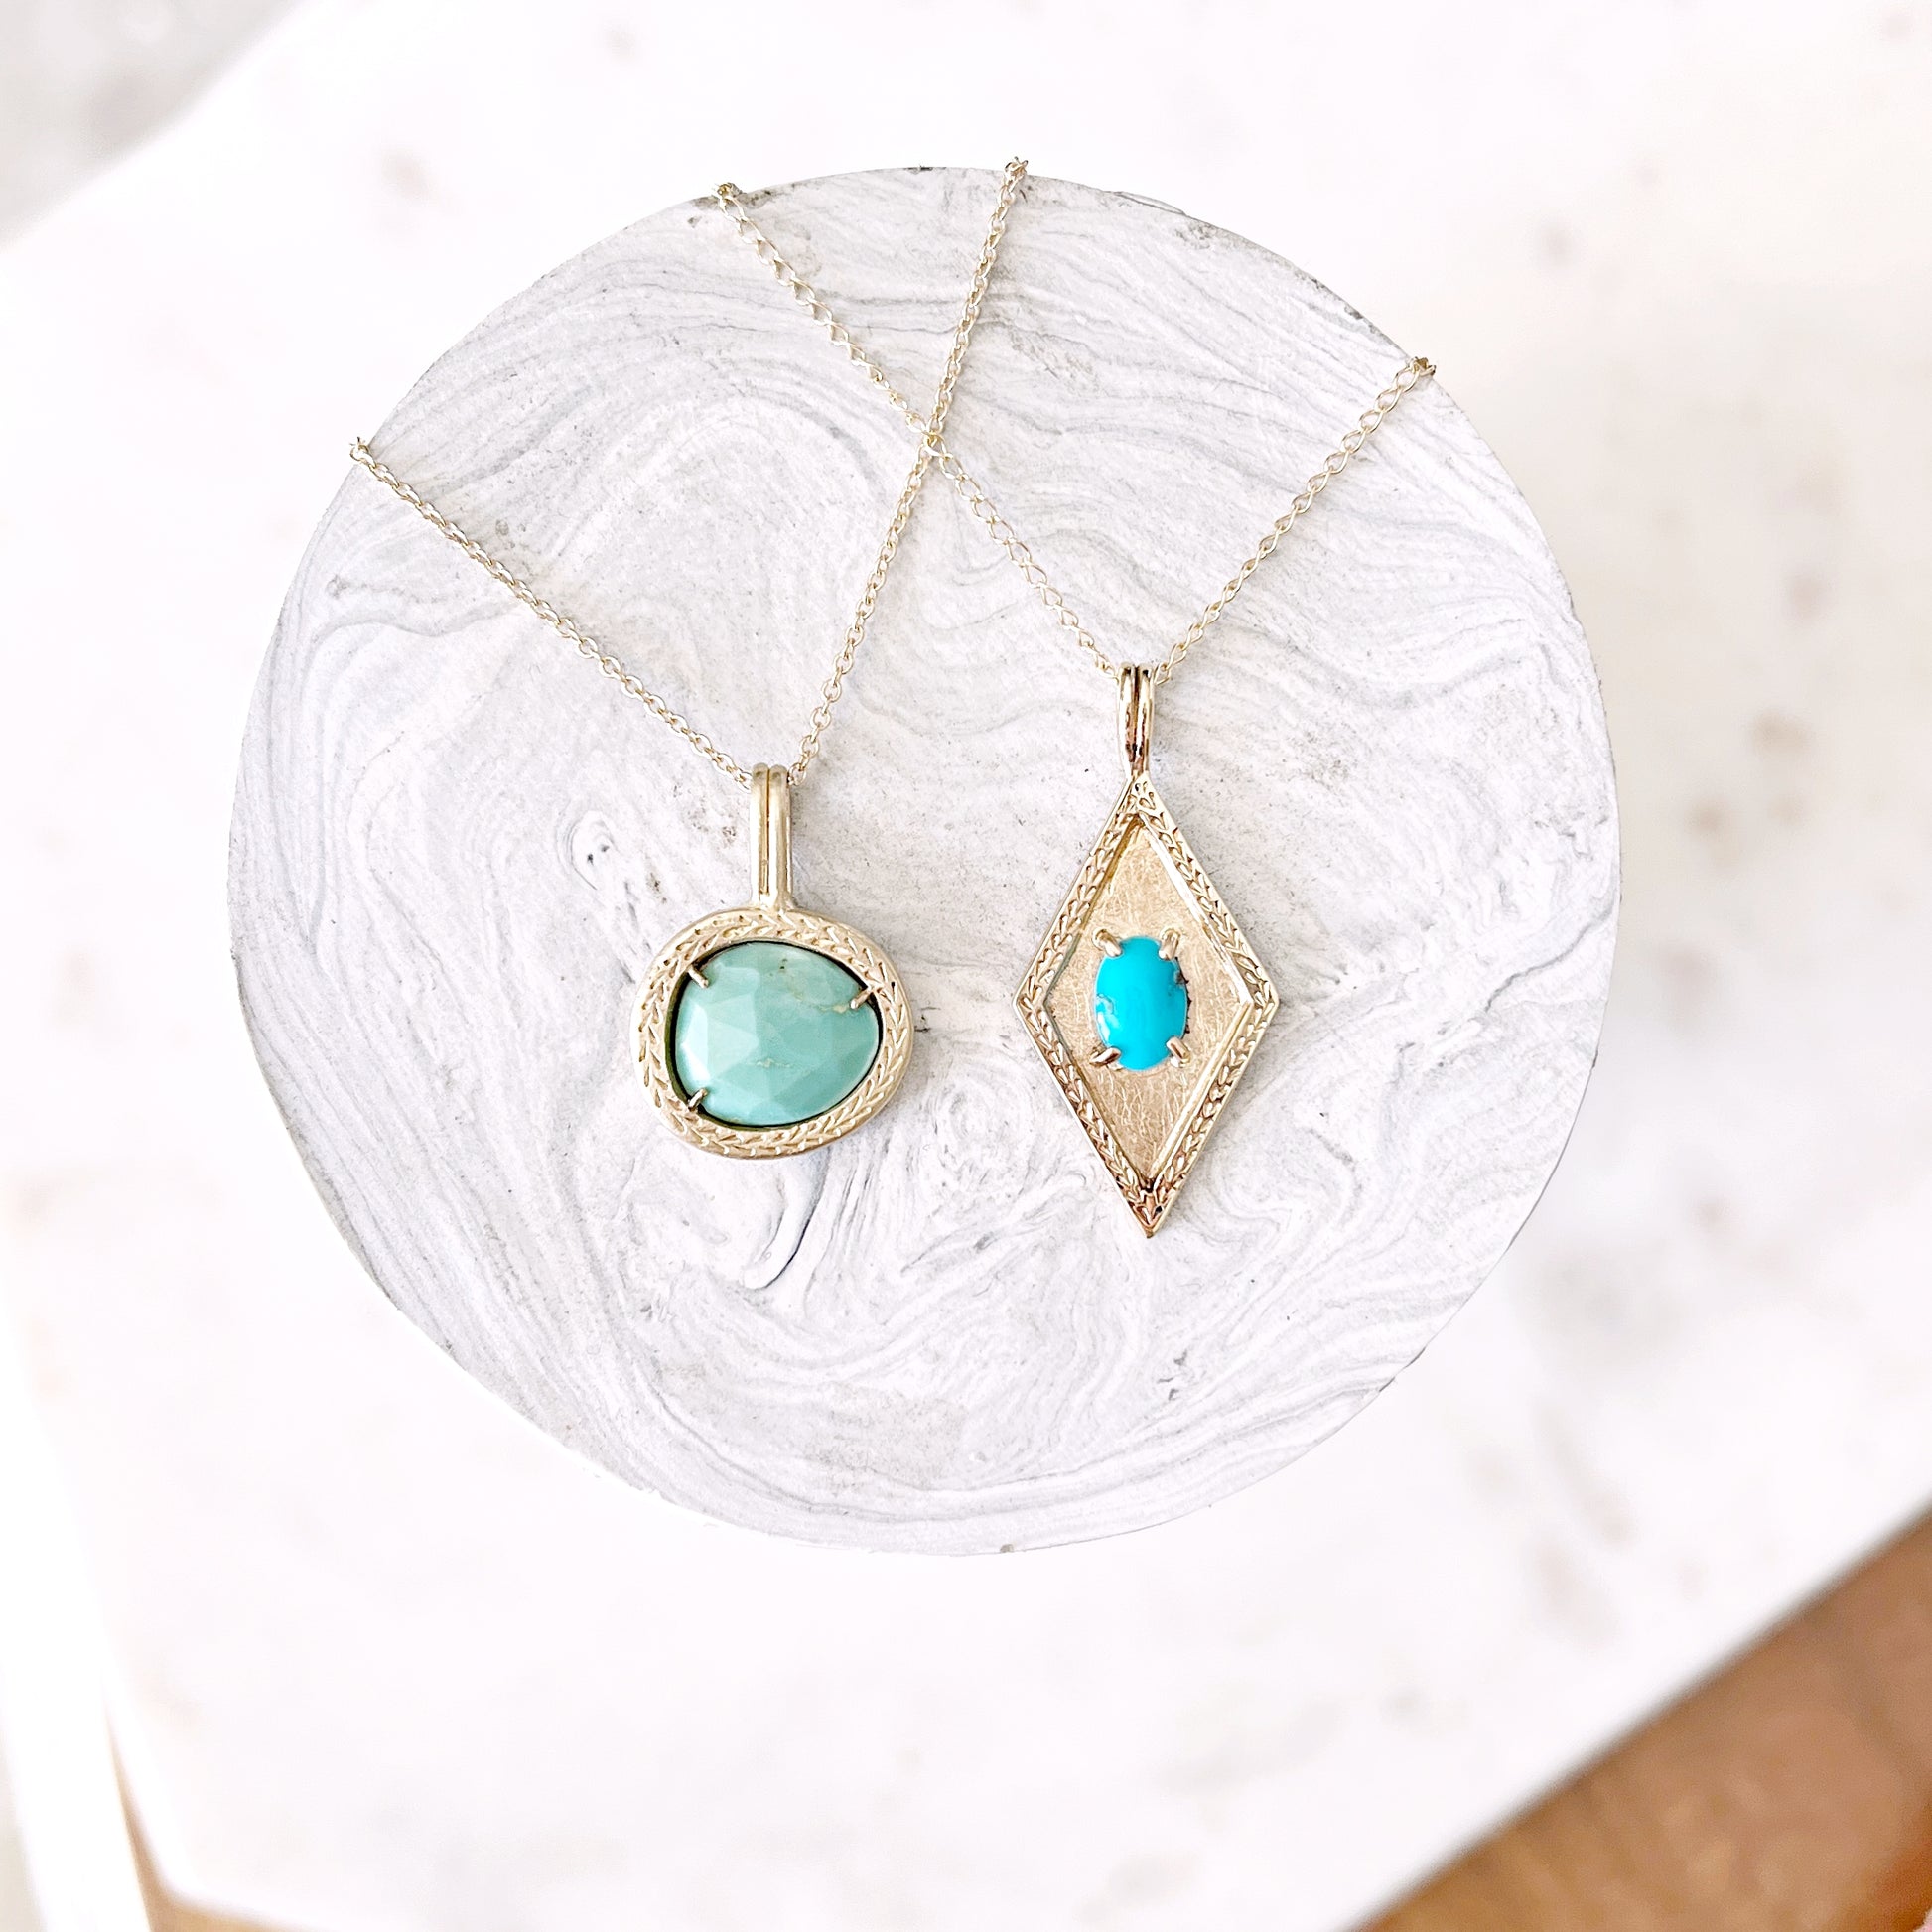 Solitaire Turquoise Pendant Necklace I